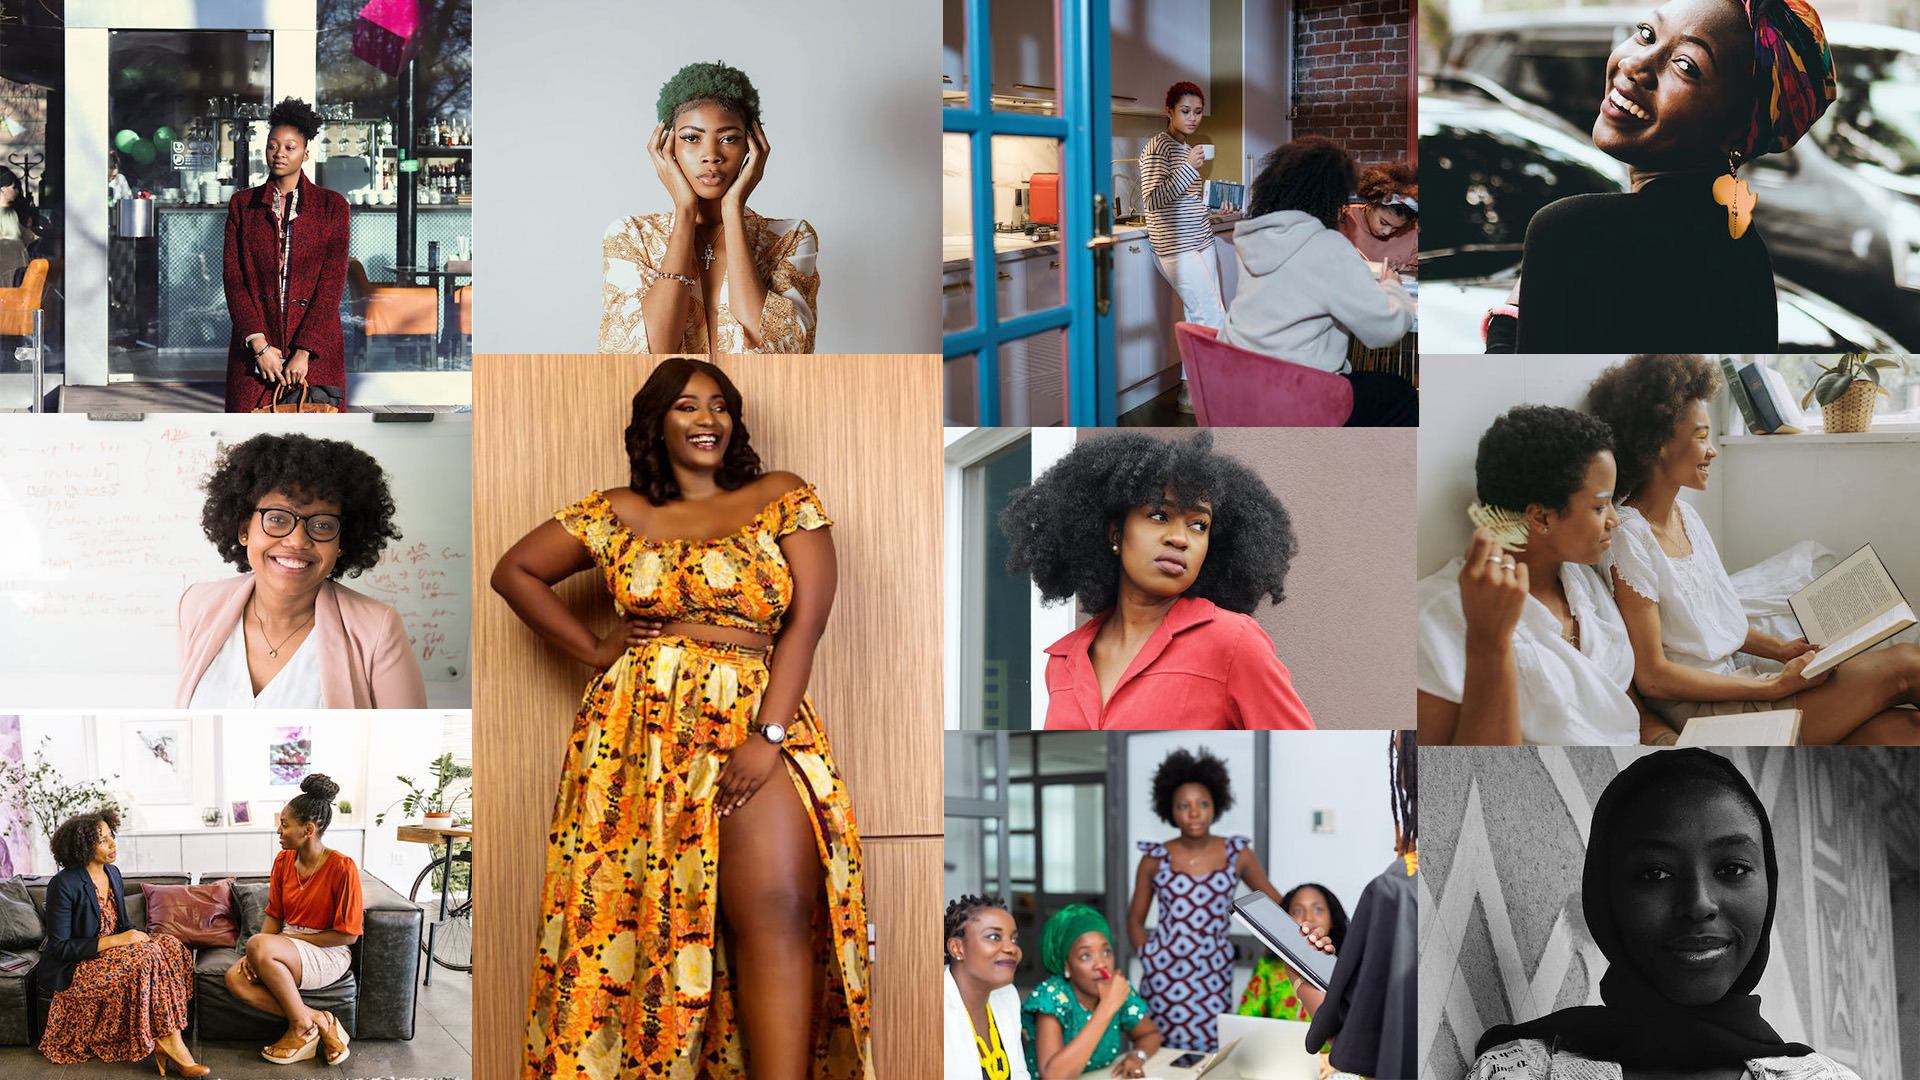 Collage of diverse Black women entrepreneurs showcasing different professions and activities, embodying Ethnic Minority Women Entrepreneur Support.